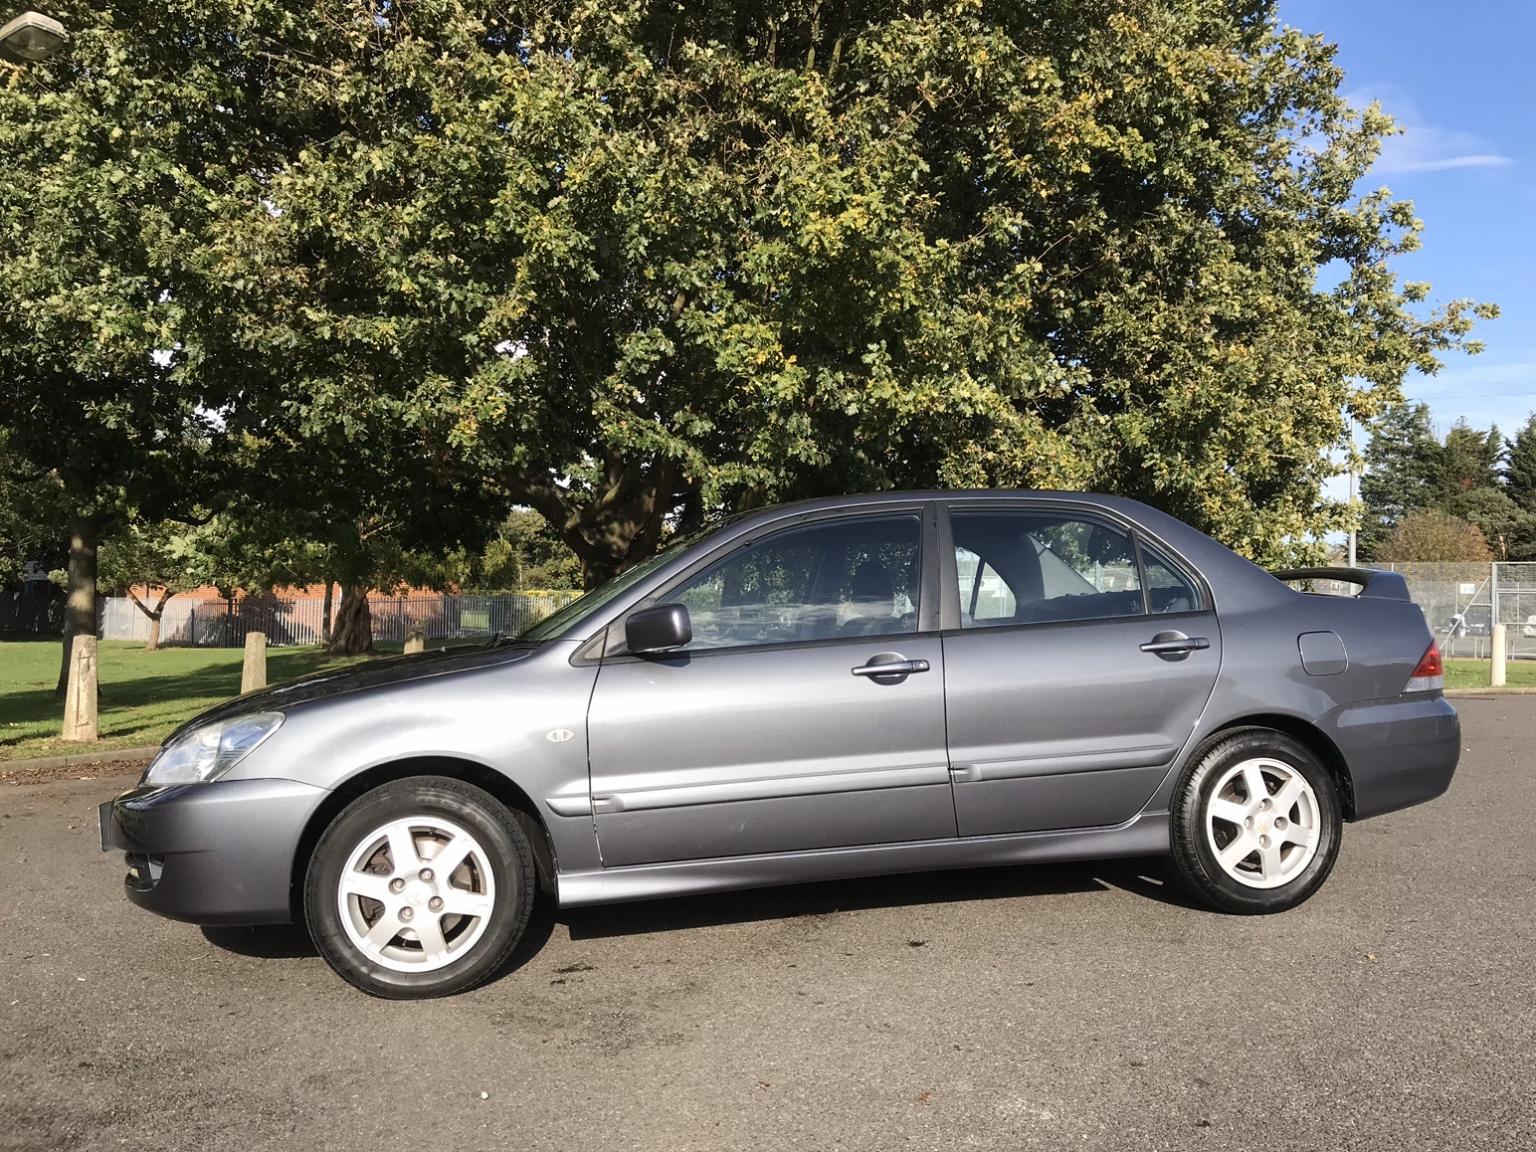 Mitsubishi Lancer 1.6 service history in Castle Point for